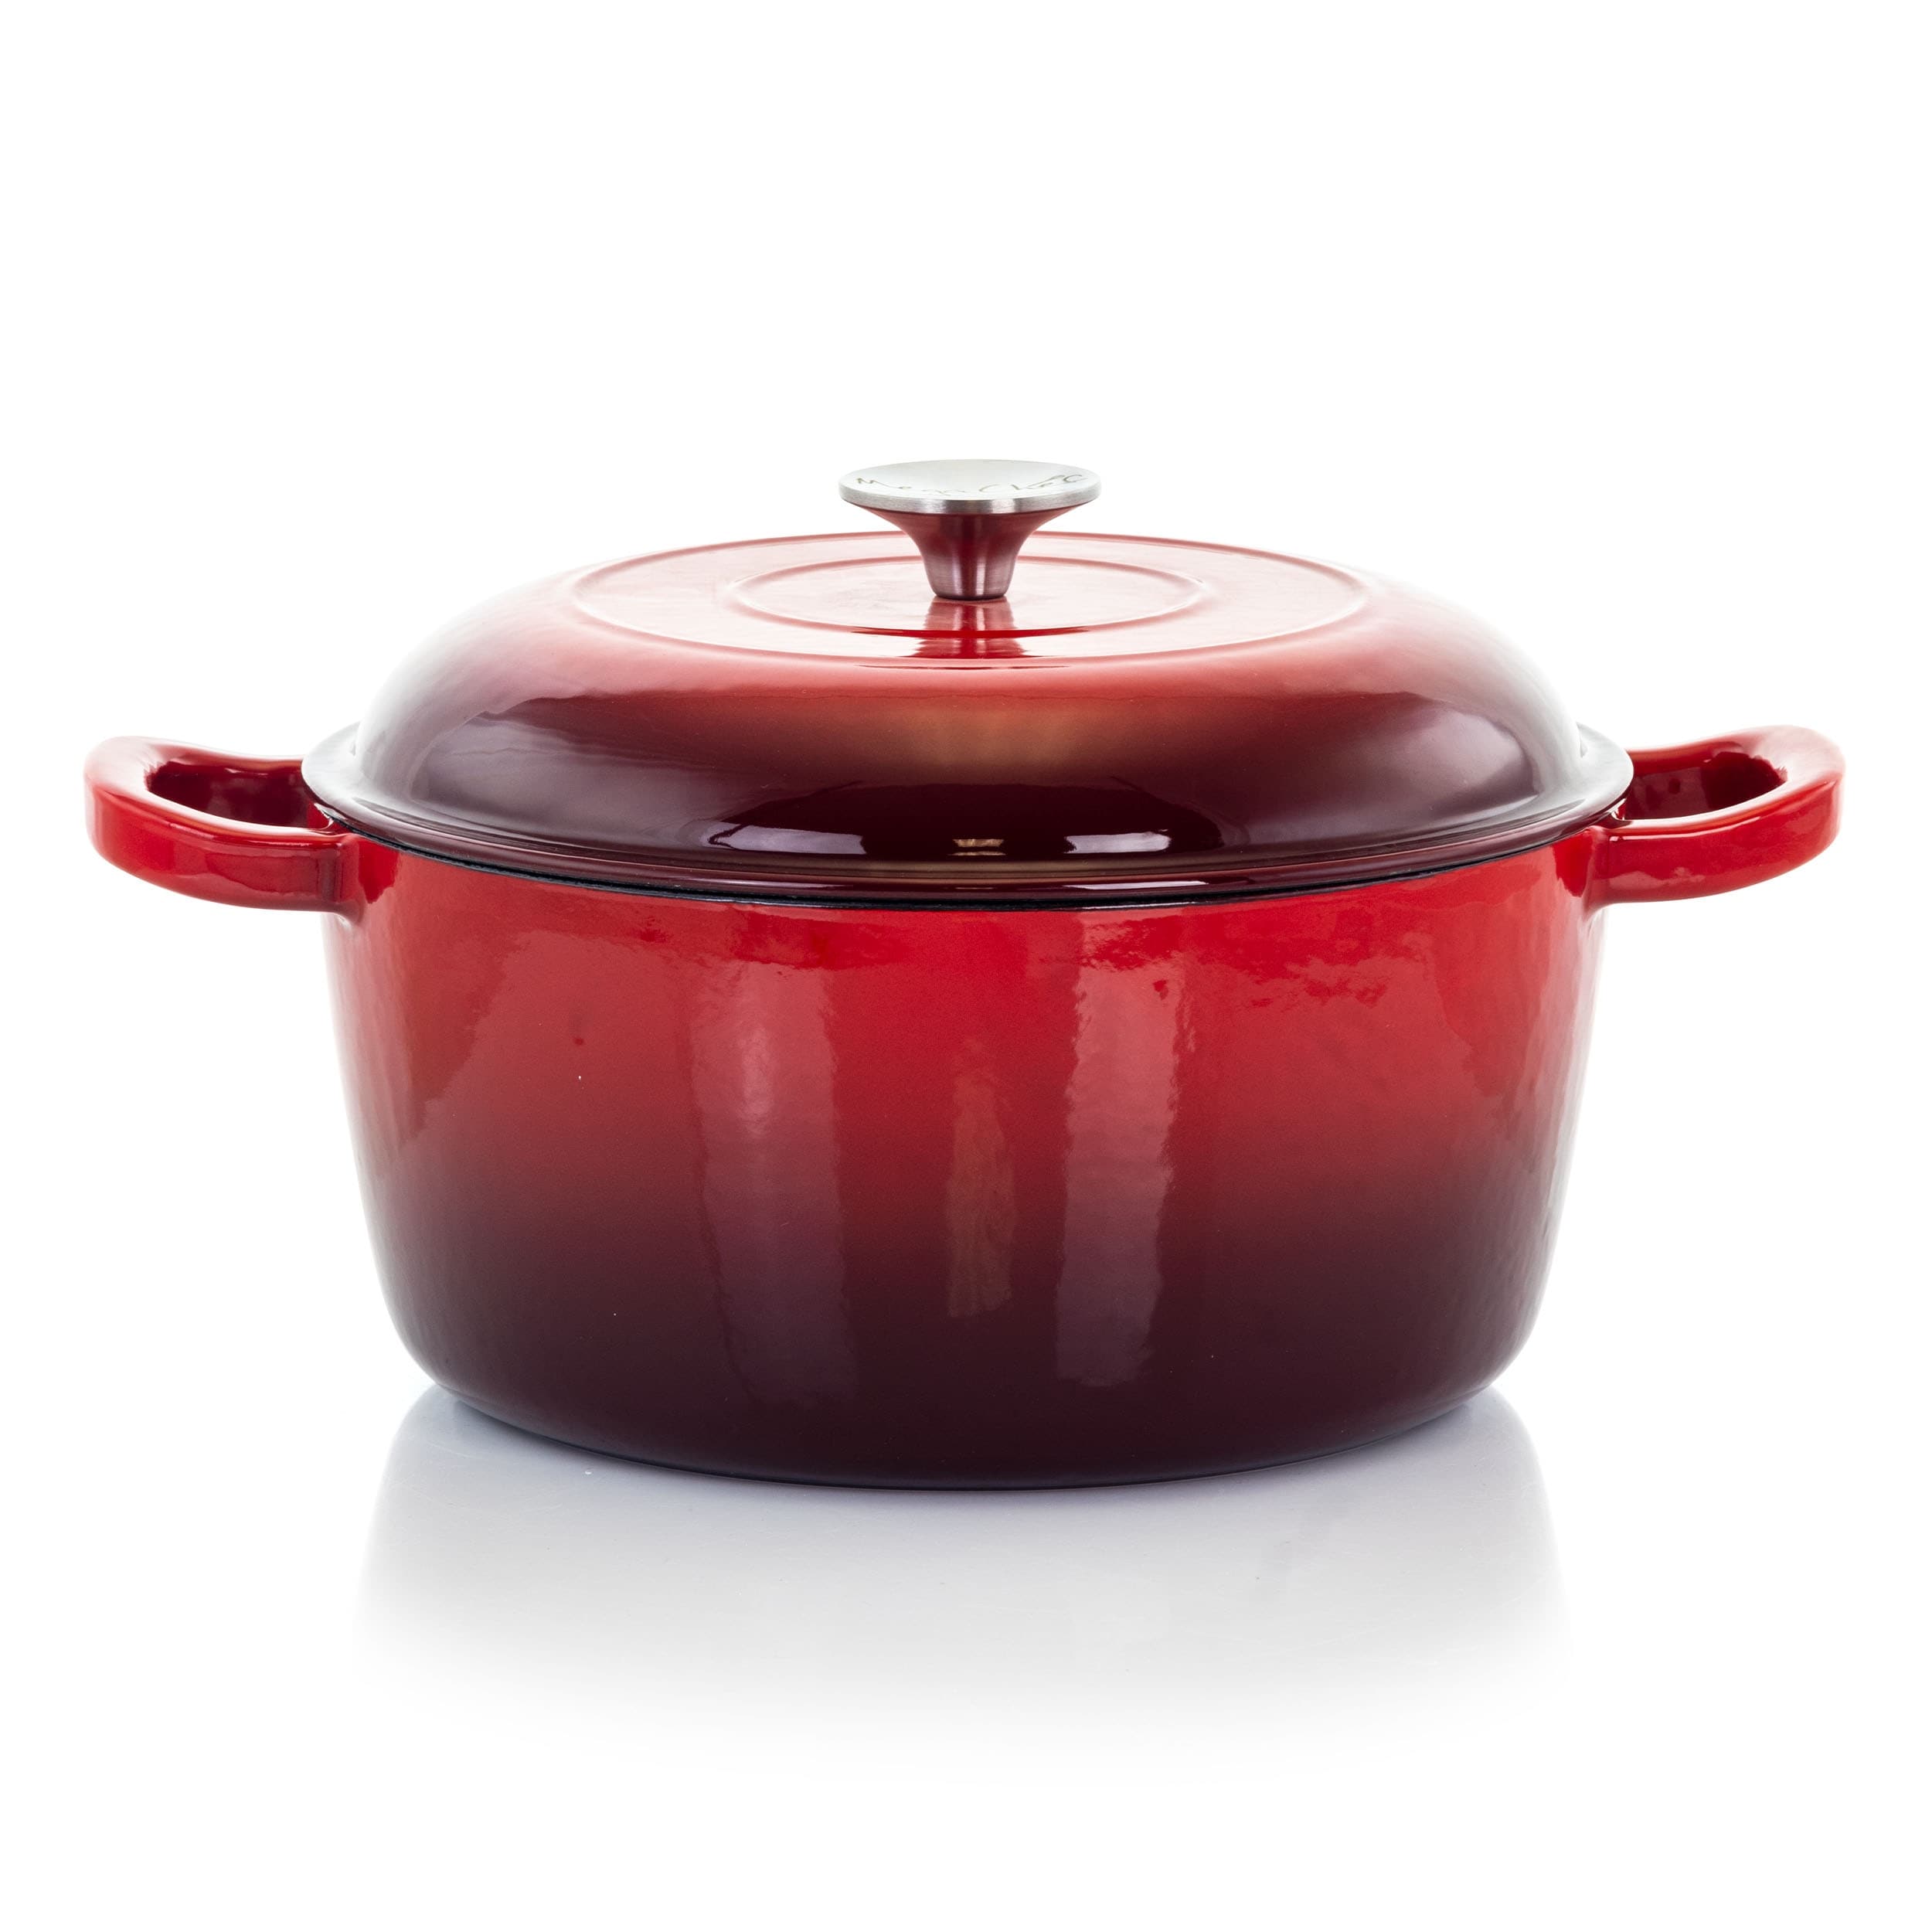 https://ak1.ostkcdn.com/images/products/is/images/direct/b8e197e398b75cbc7d1a5fafab51dbbb8dec7b4d/MegaChef-5-Quarts-Round-Enameled-Cast-Iron-Casserole-with-Lid-in-Red.jpg